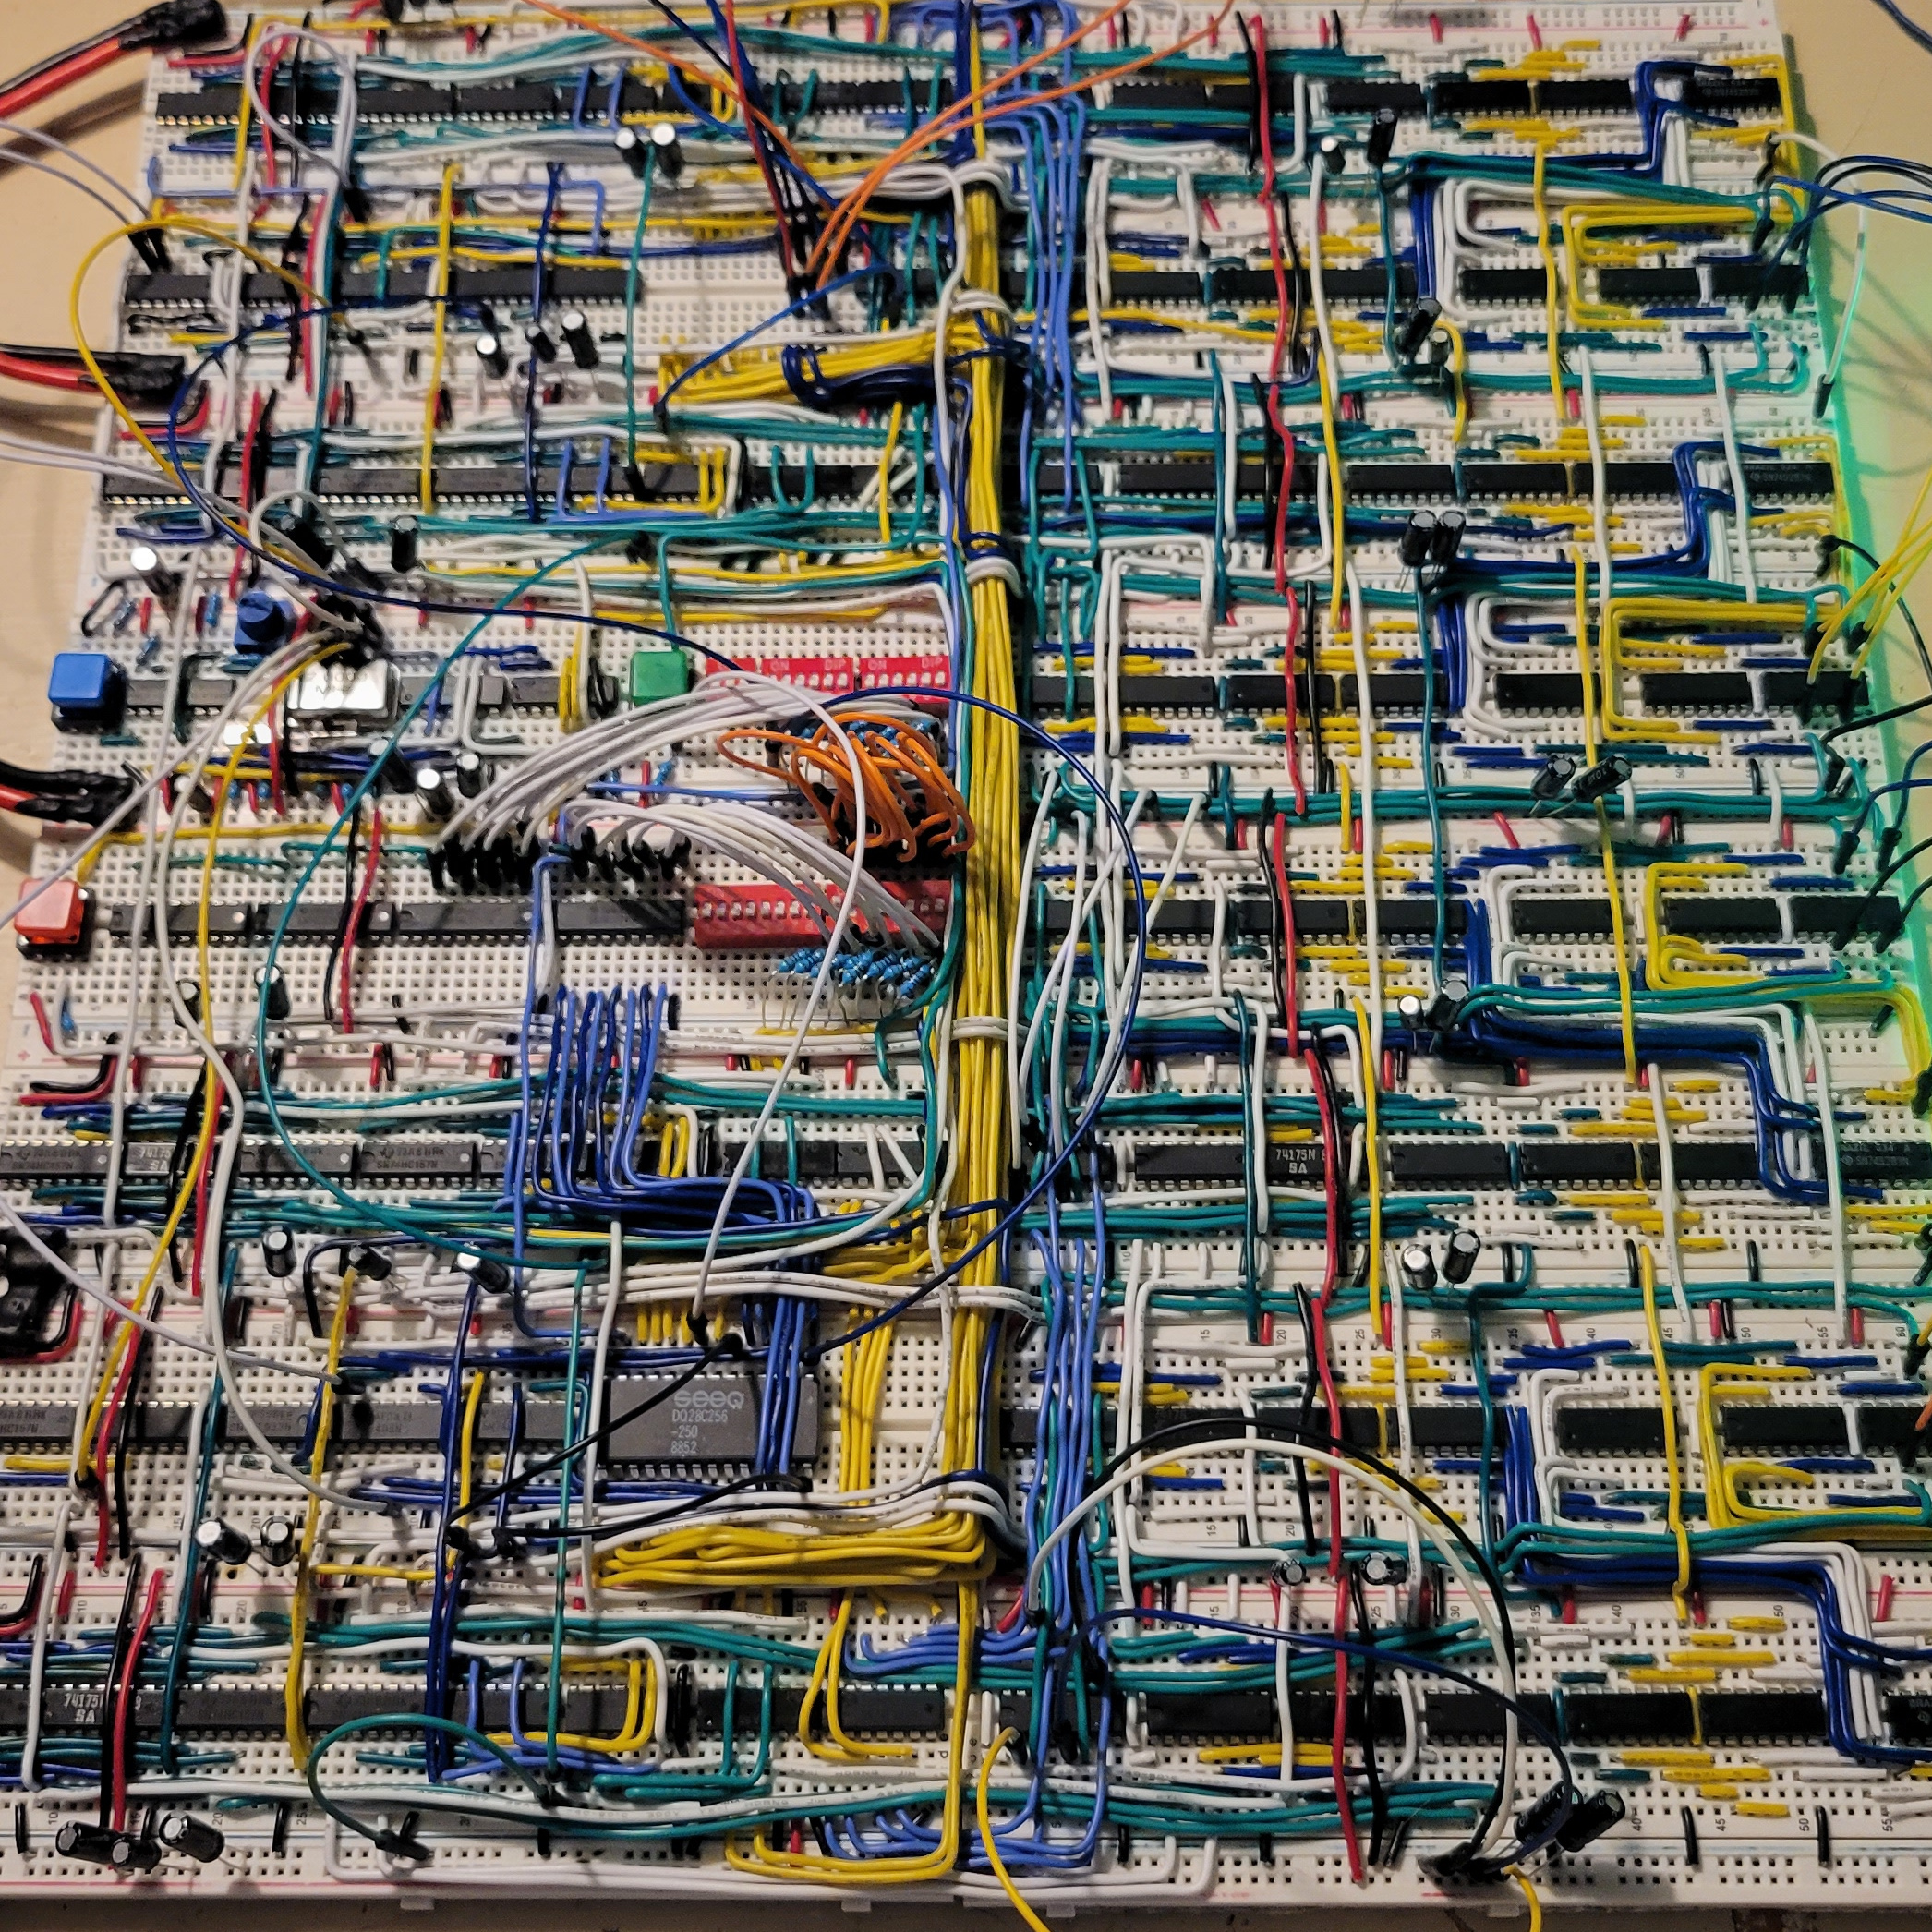 A top-down view of breadboards and makeshift circuitry.